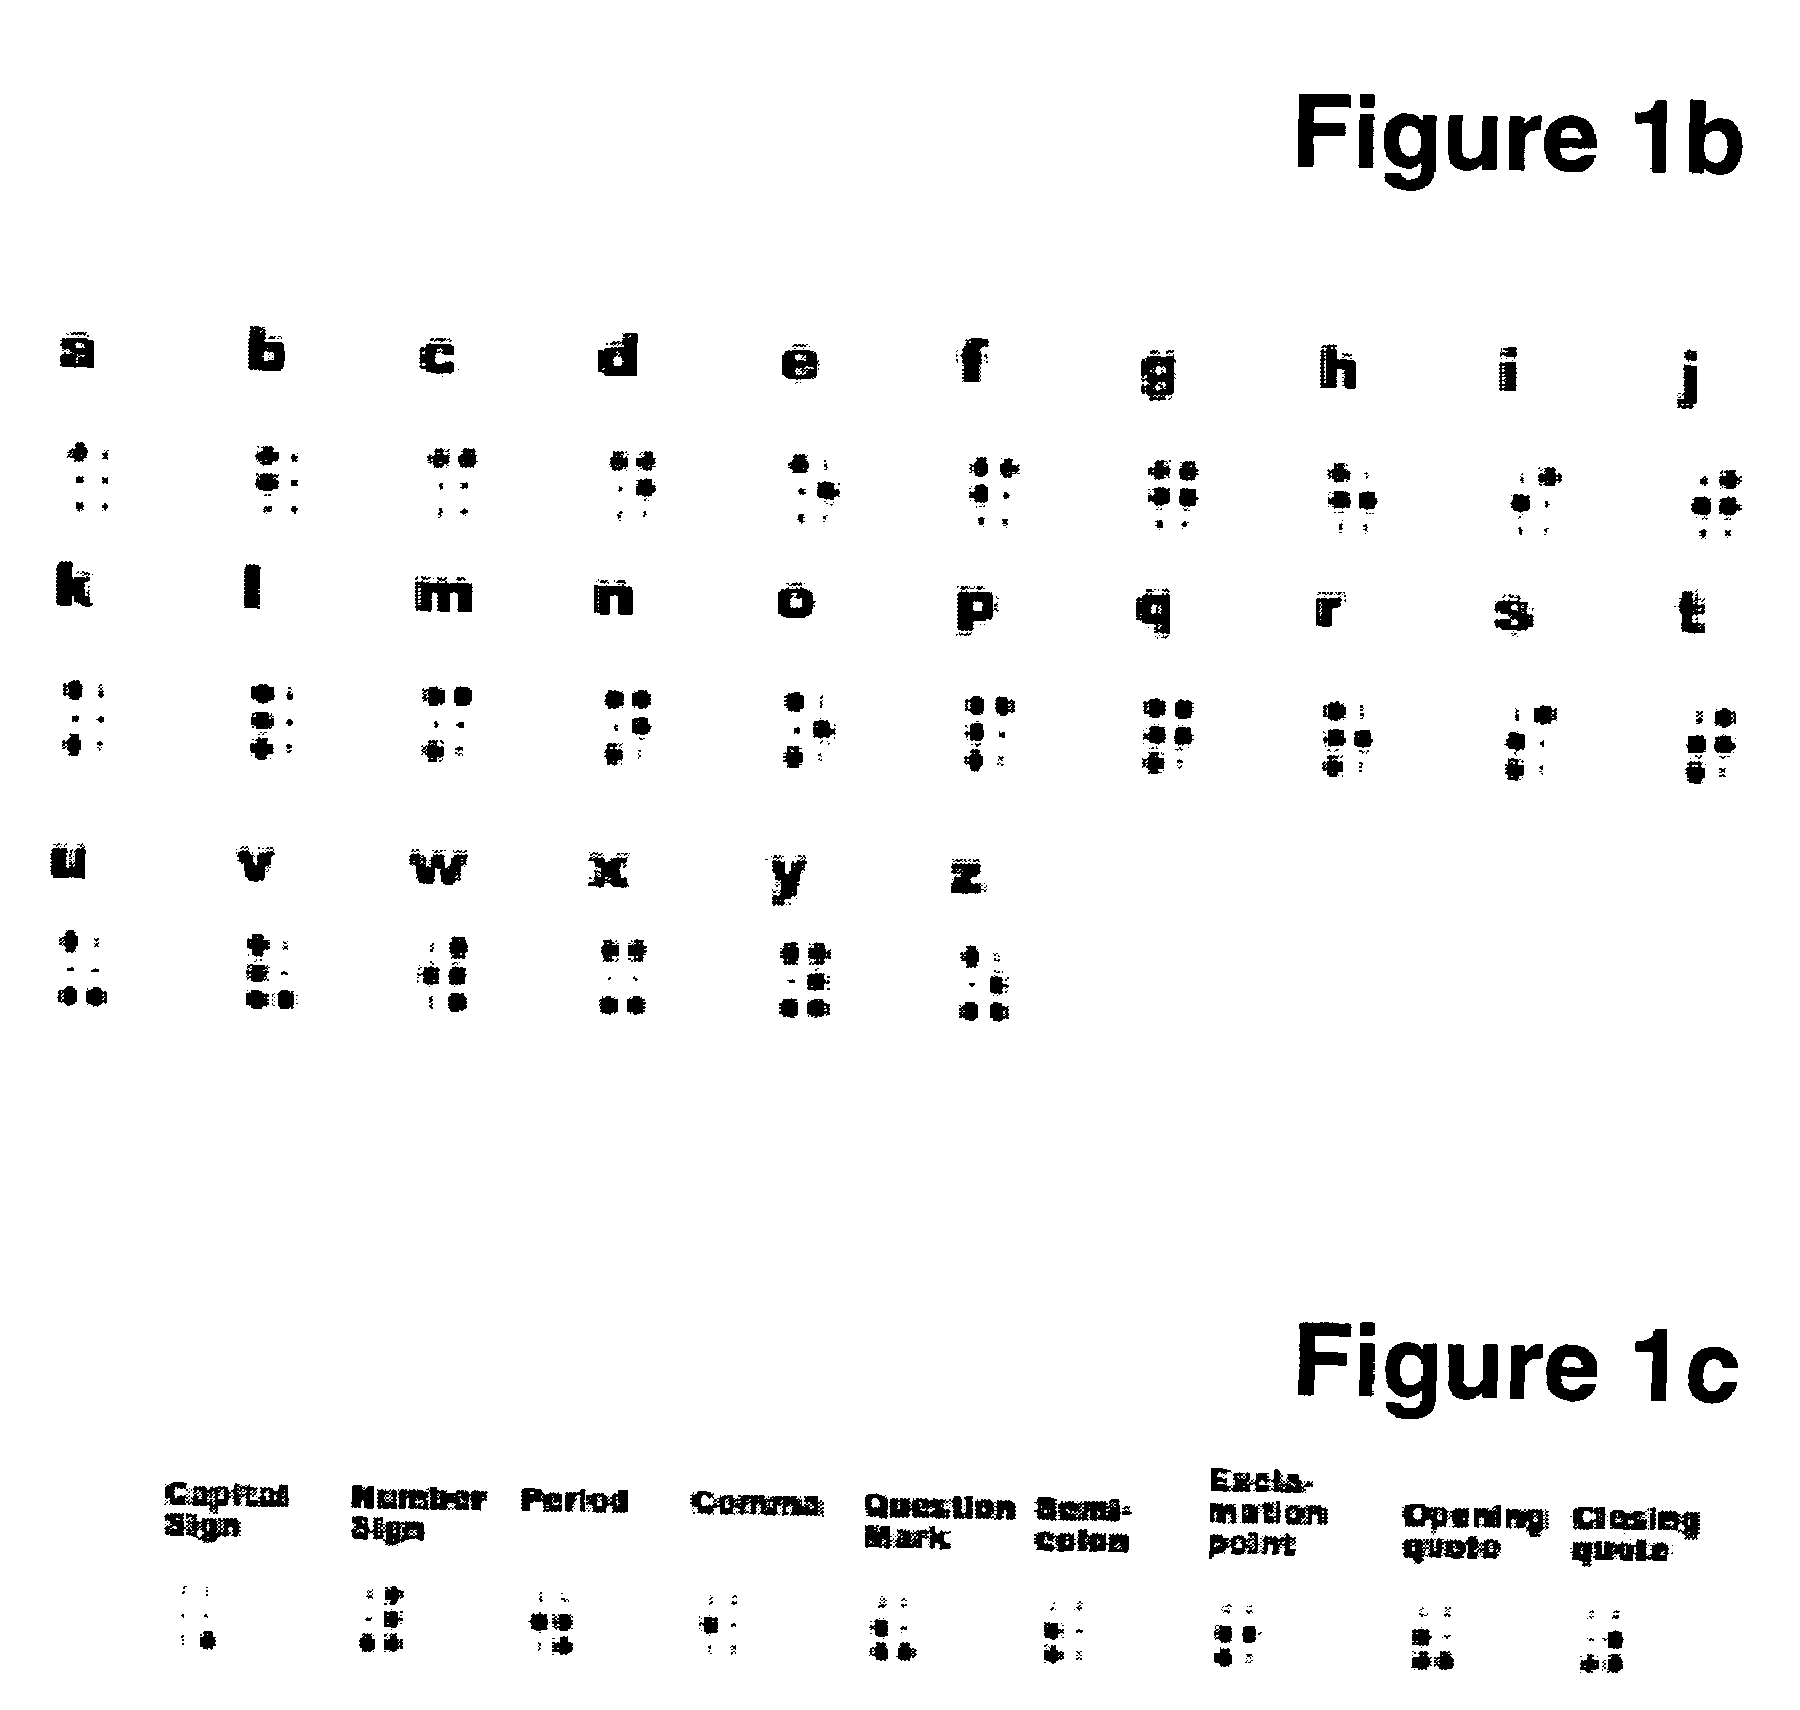 System and method for integrating tactile language with the visual alphanumeric characters